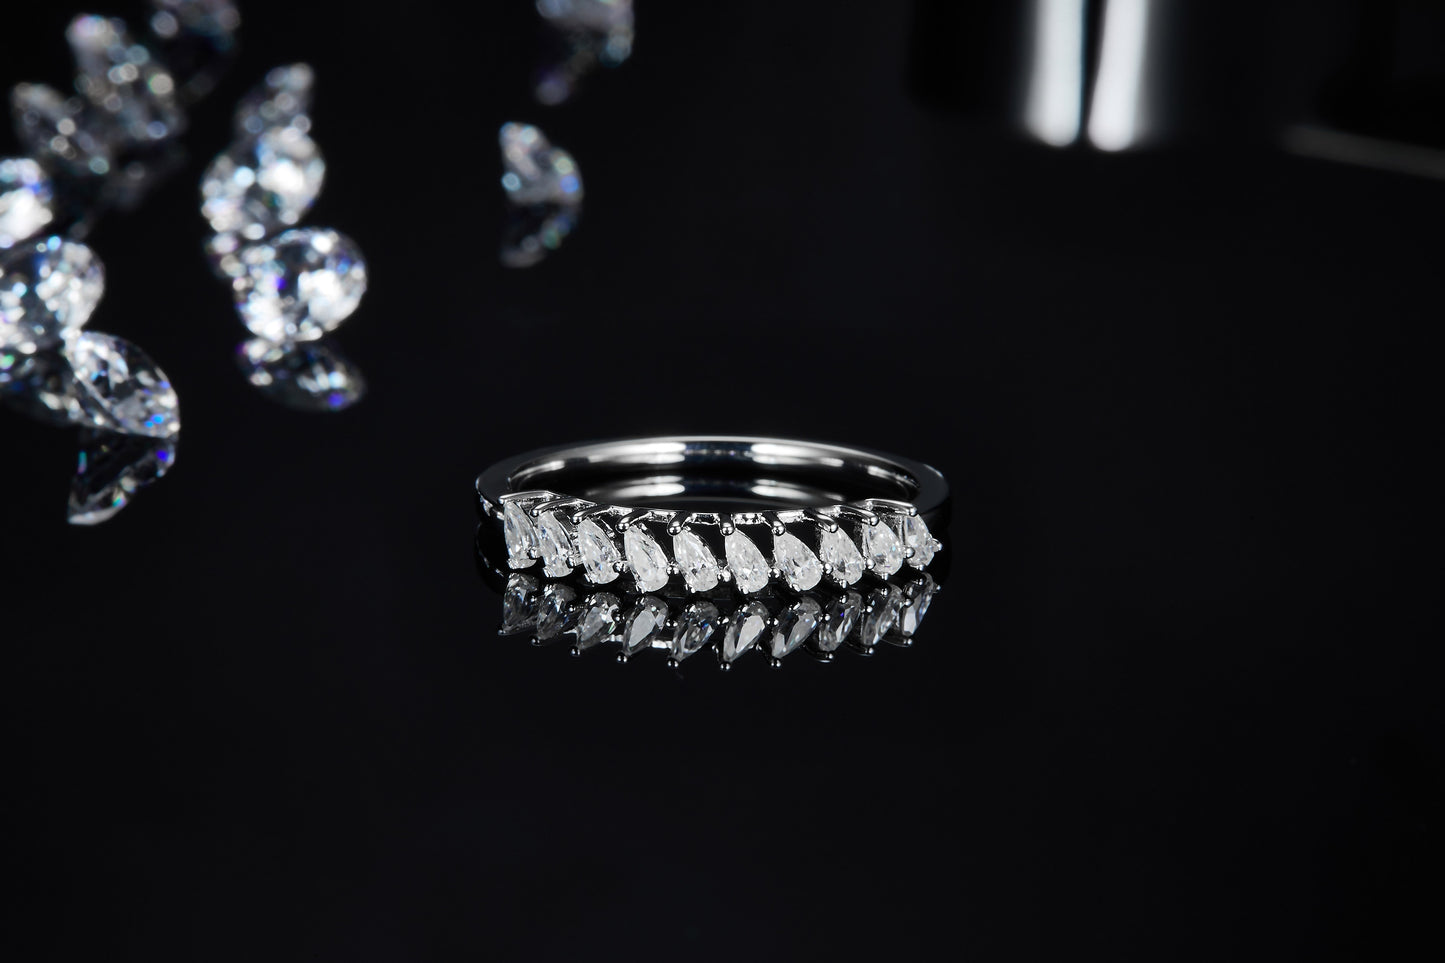 A silver wedding ring set with several vertical pear cut clear gems.